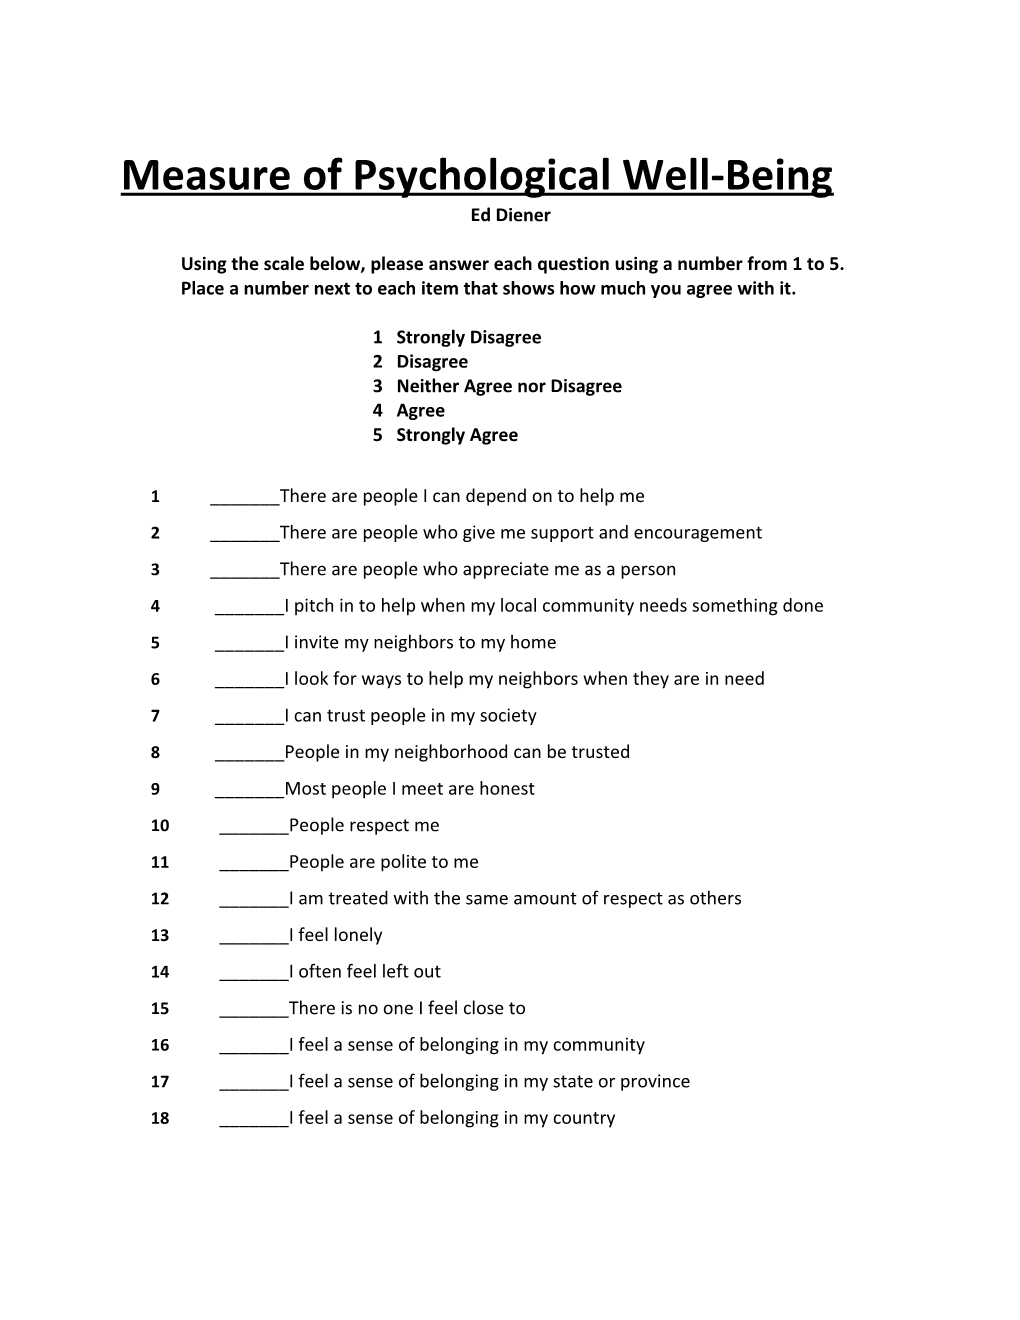 Measure of Psychological Well-Being